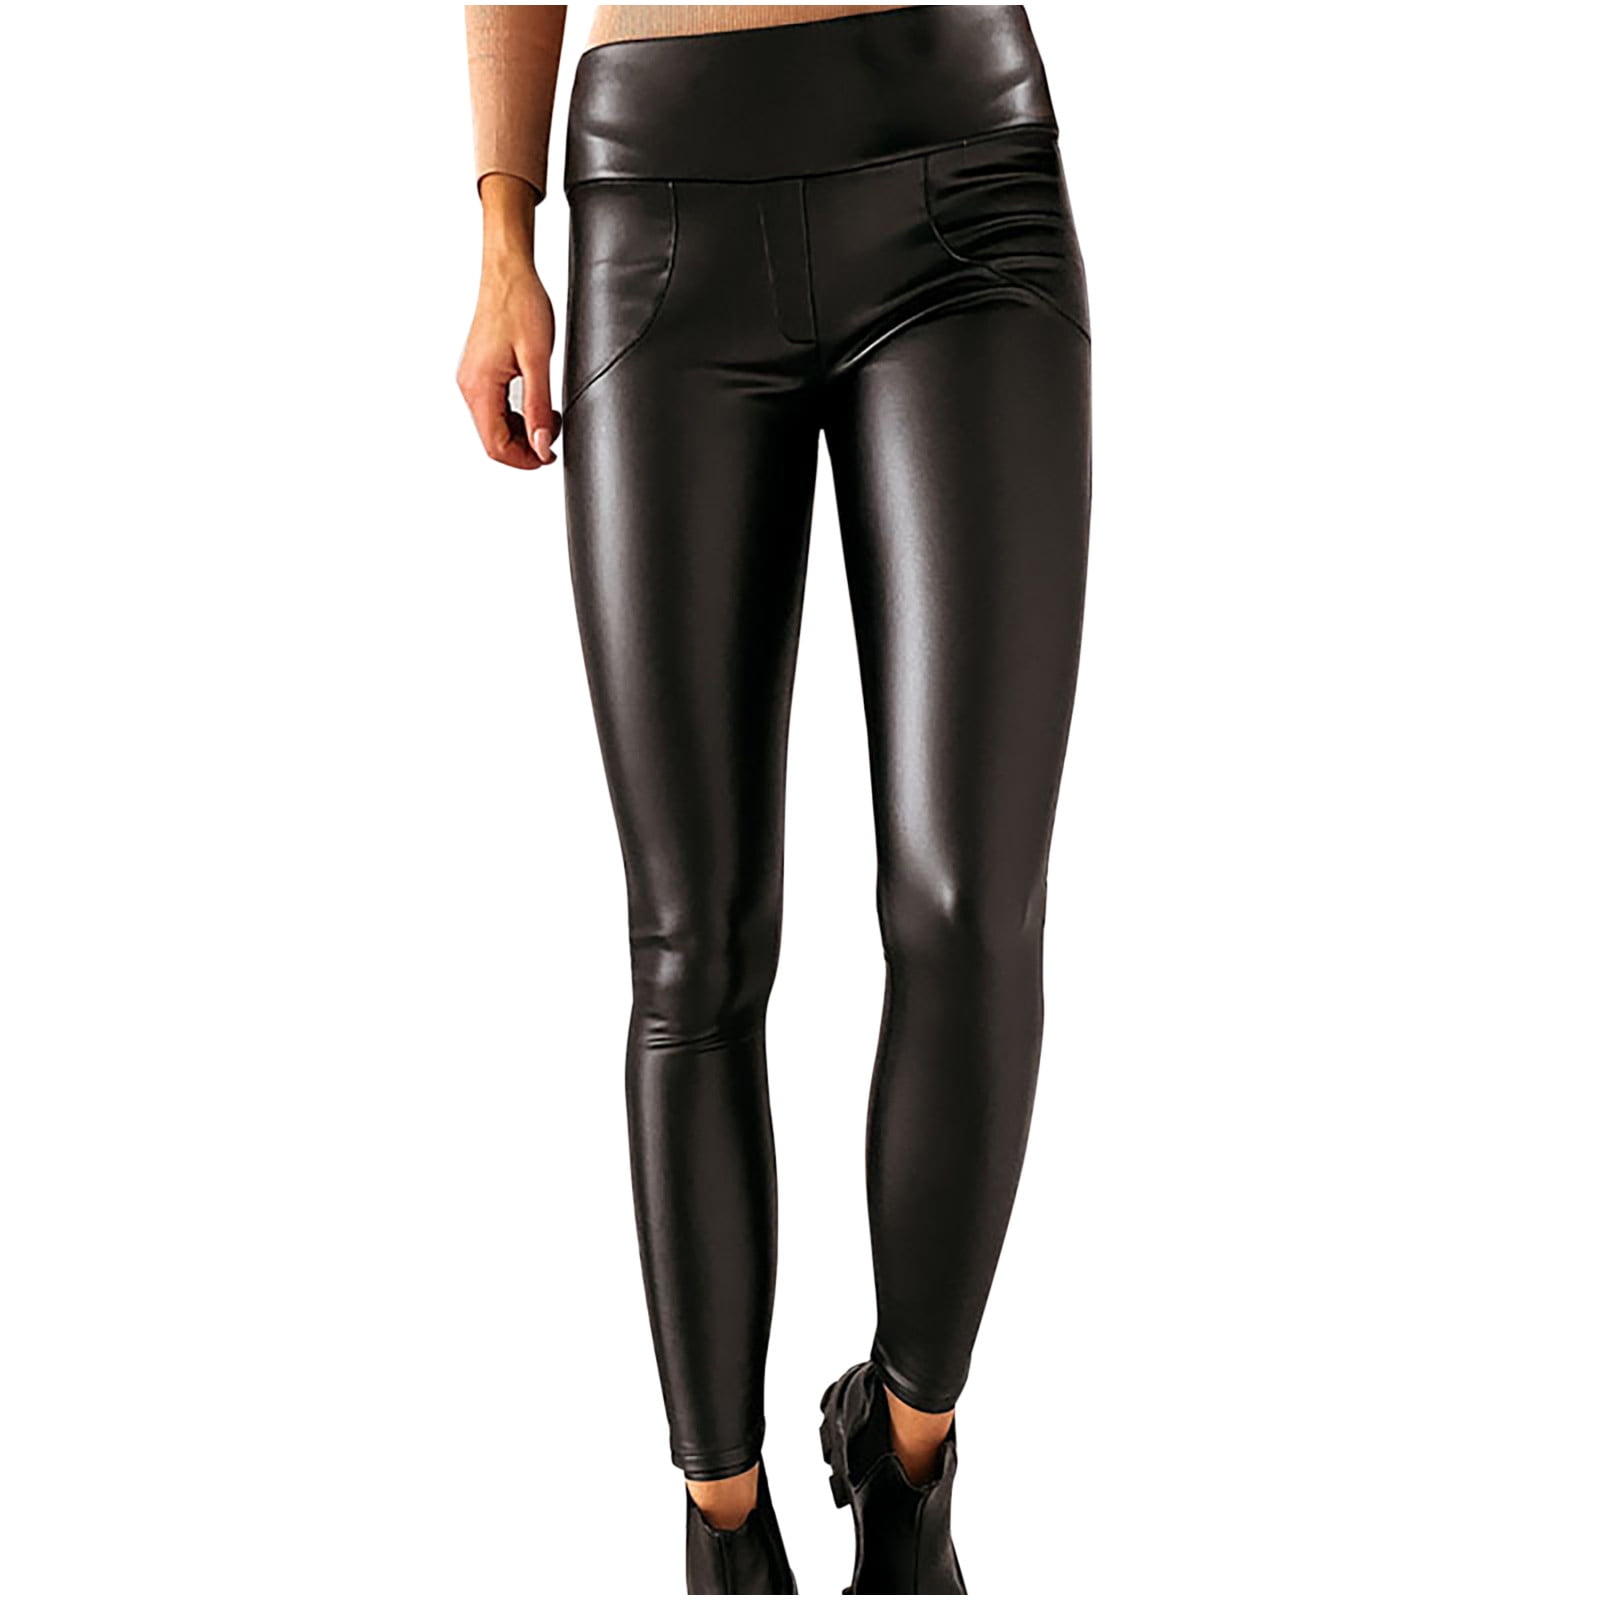 DxhmoneyHX Leather Pants for Women Faux Leather Leggings Sexy Black  Custumes Skinny Tights Pants Trousers 